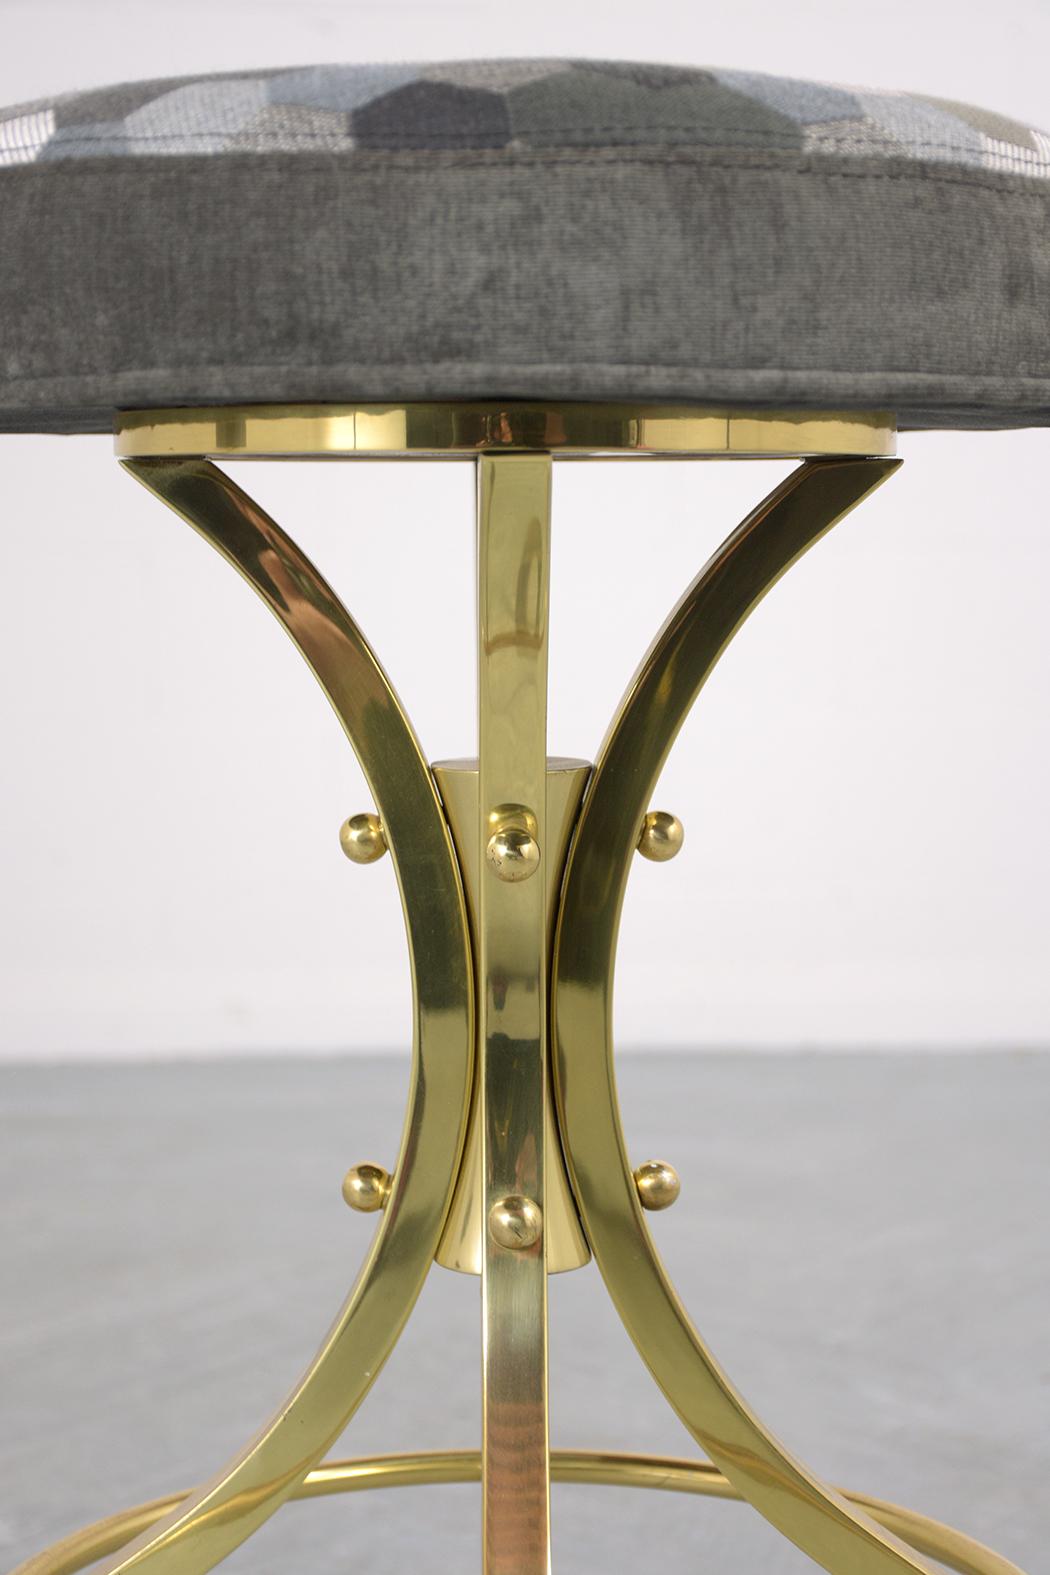 Foam Restored Mid-Century Brass Swivel Bar Stools with Patterned Fabric Seats For Sale